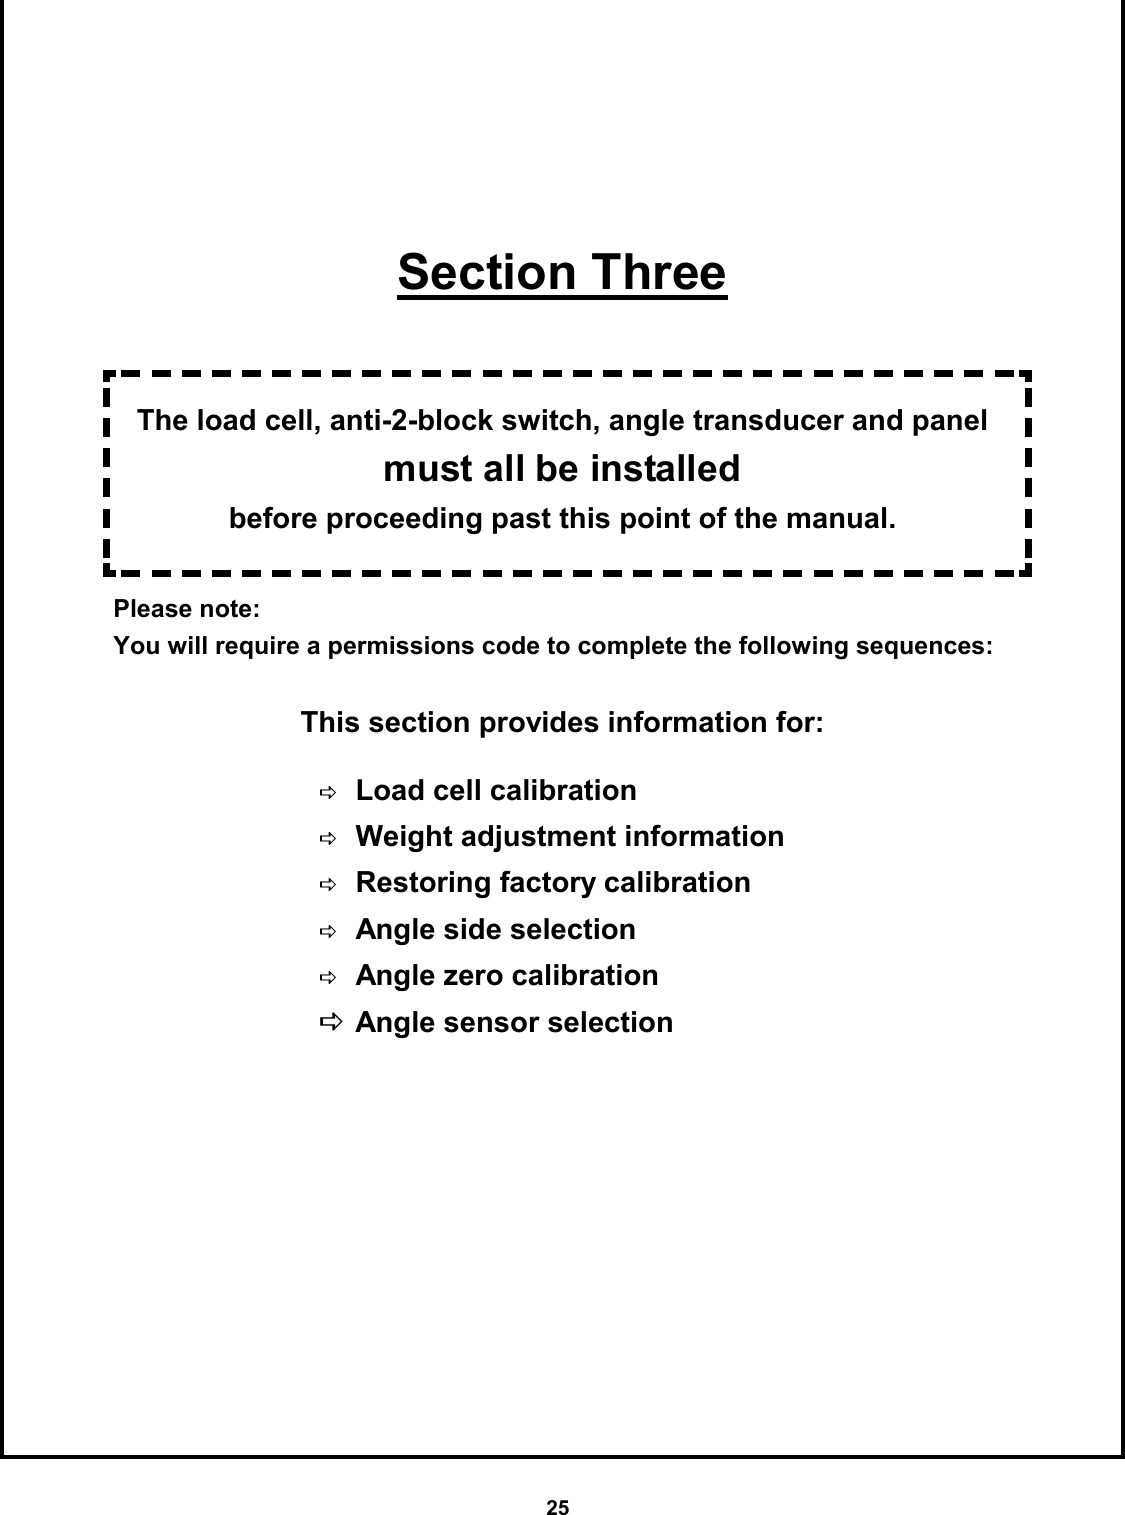 25        Section Three   The load cell, anti-2-block switch, angle transducer and panel must all be installed  before proceeding past this point of the manual.  Please note:   You will require a permissions code to complete the following sequences:  This section provides information for:       DLoad cell calibration  DWeight adjustment information DRestoring factory calibration DAngle side selection DAngle zero calibration DAngle sensor selection 